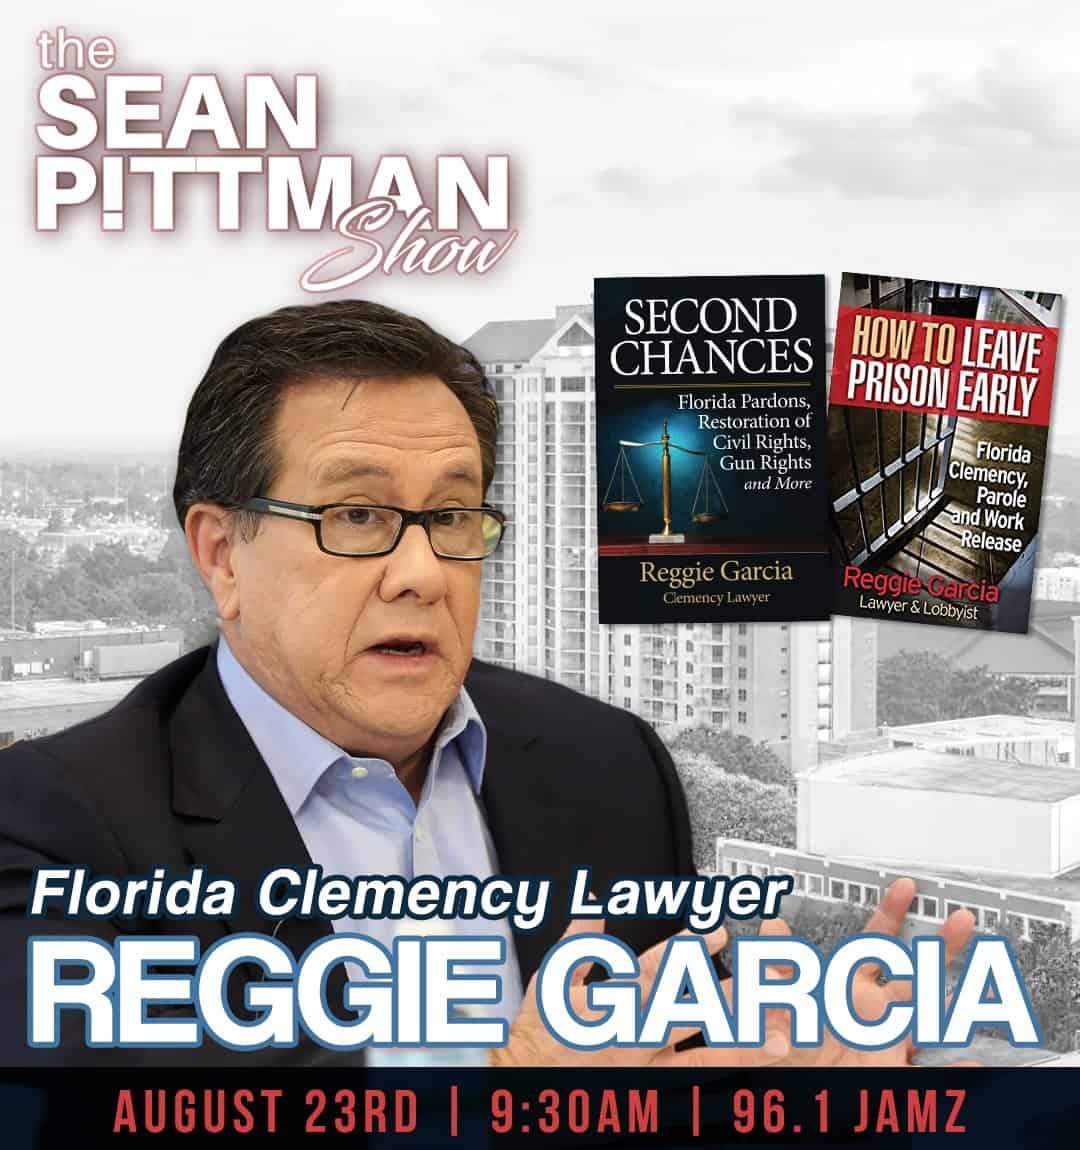 Florida Clemency Attorney called into The Sean Pittman Show